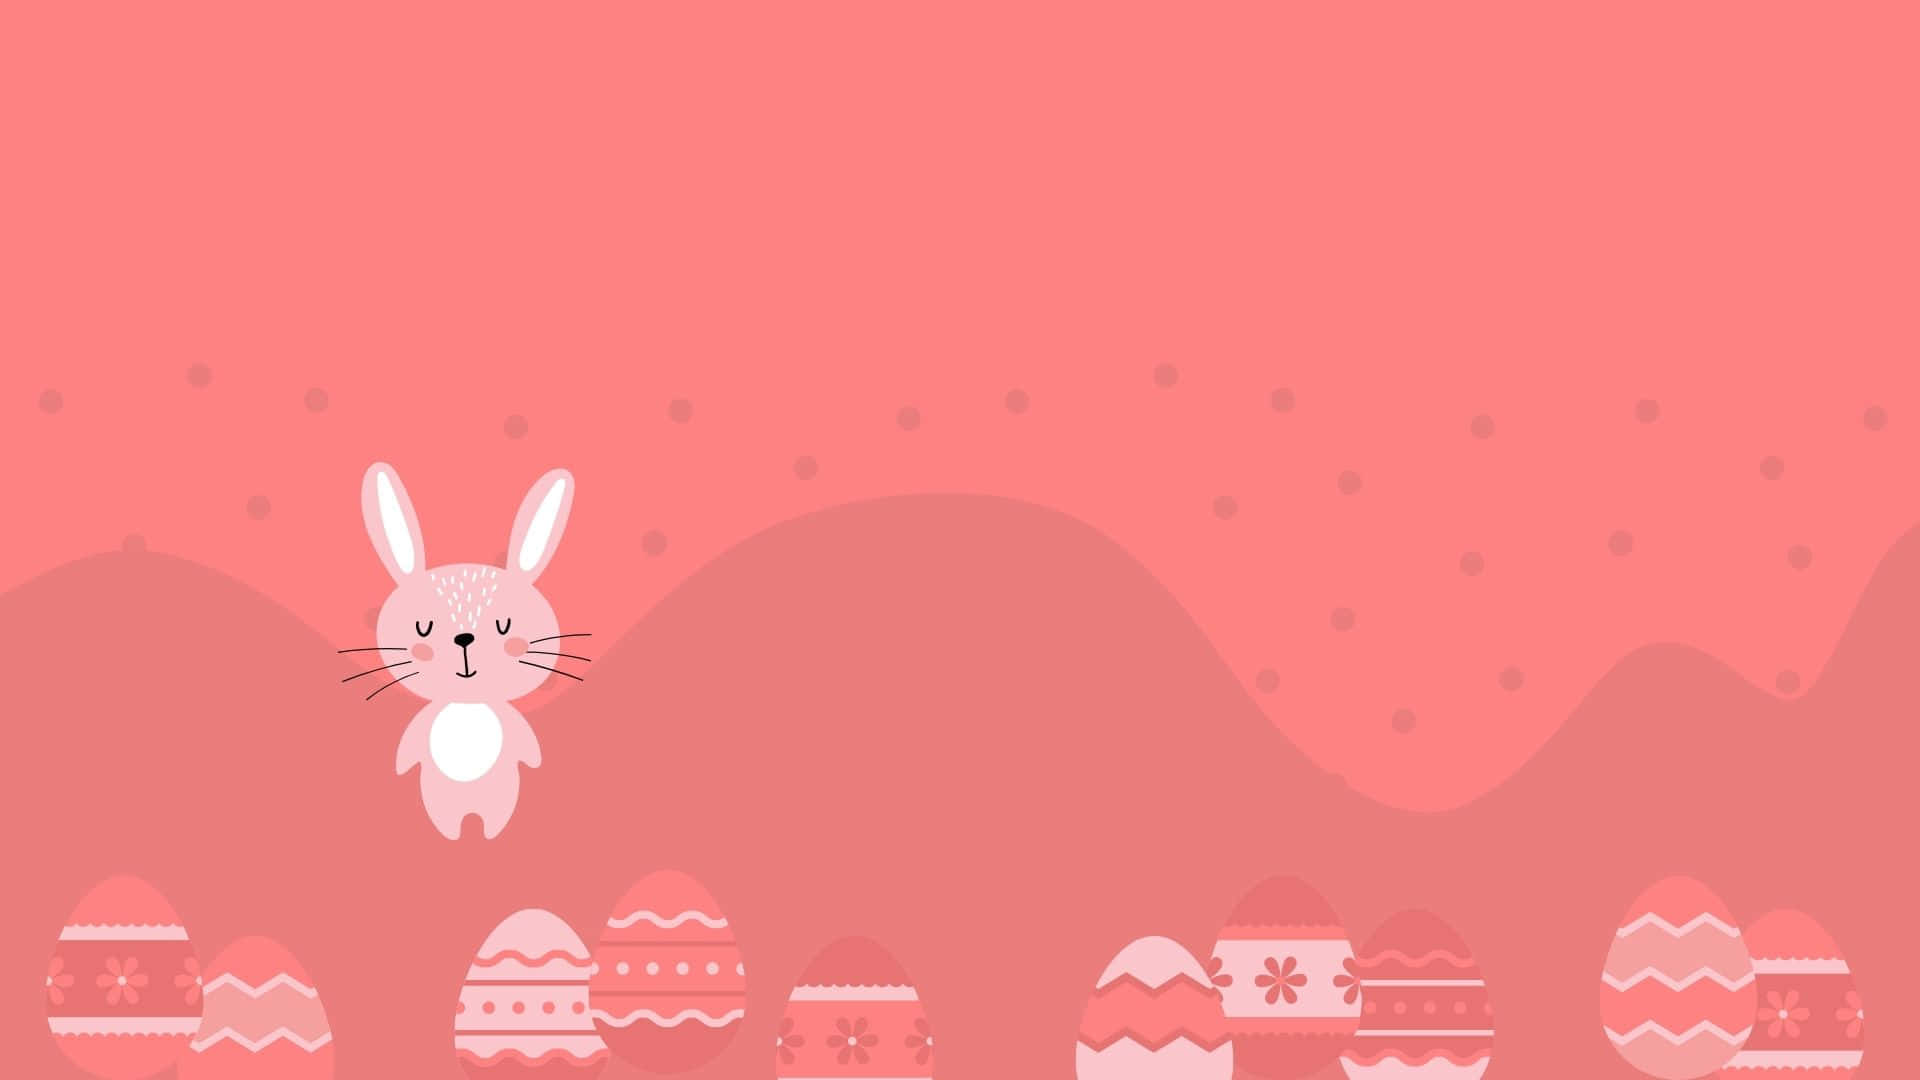 Short, sweet and cuddly - an adorable pink bunny! Wallpaper